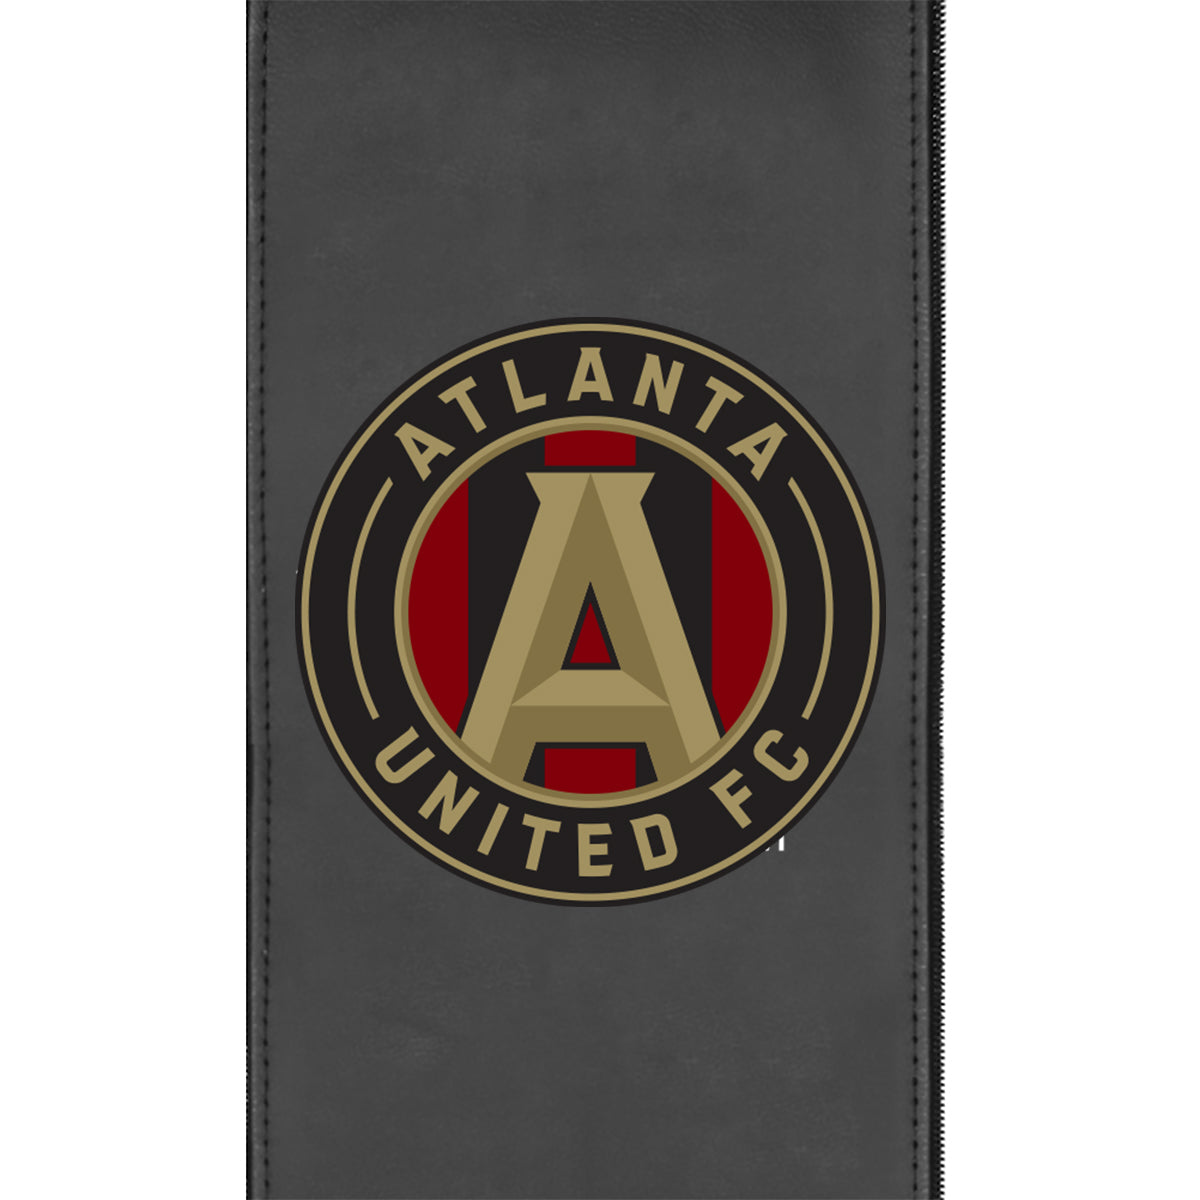 Stealth Power Plus Recliner with Atlanta United FC Logo